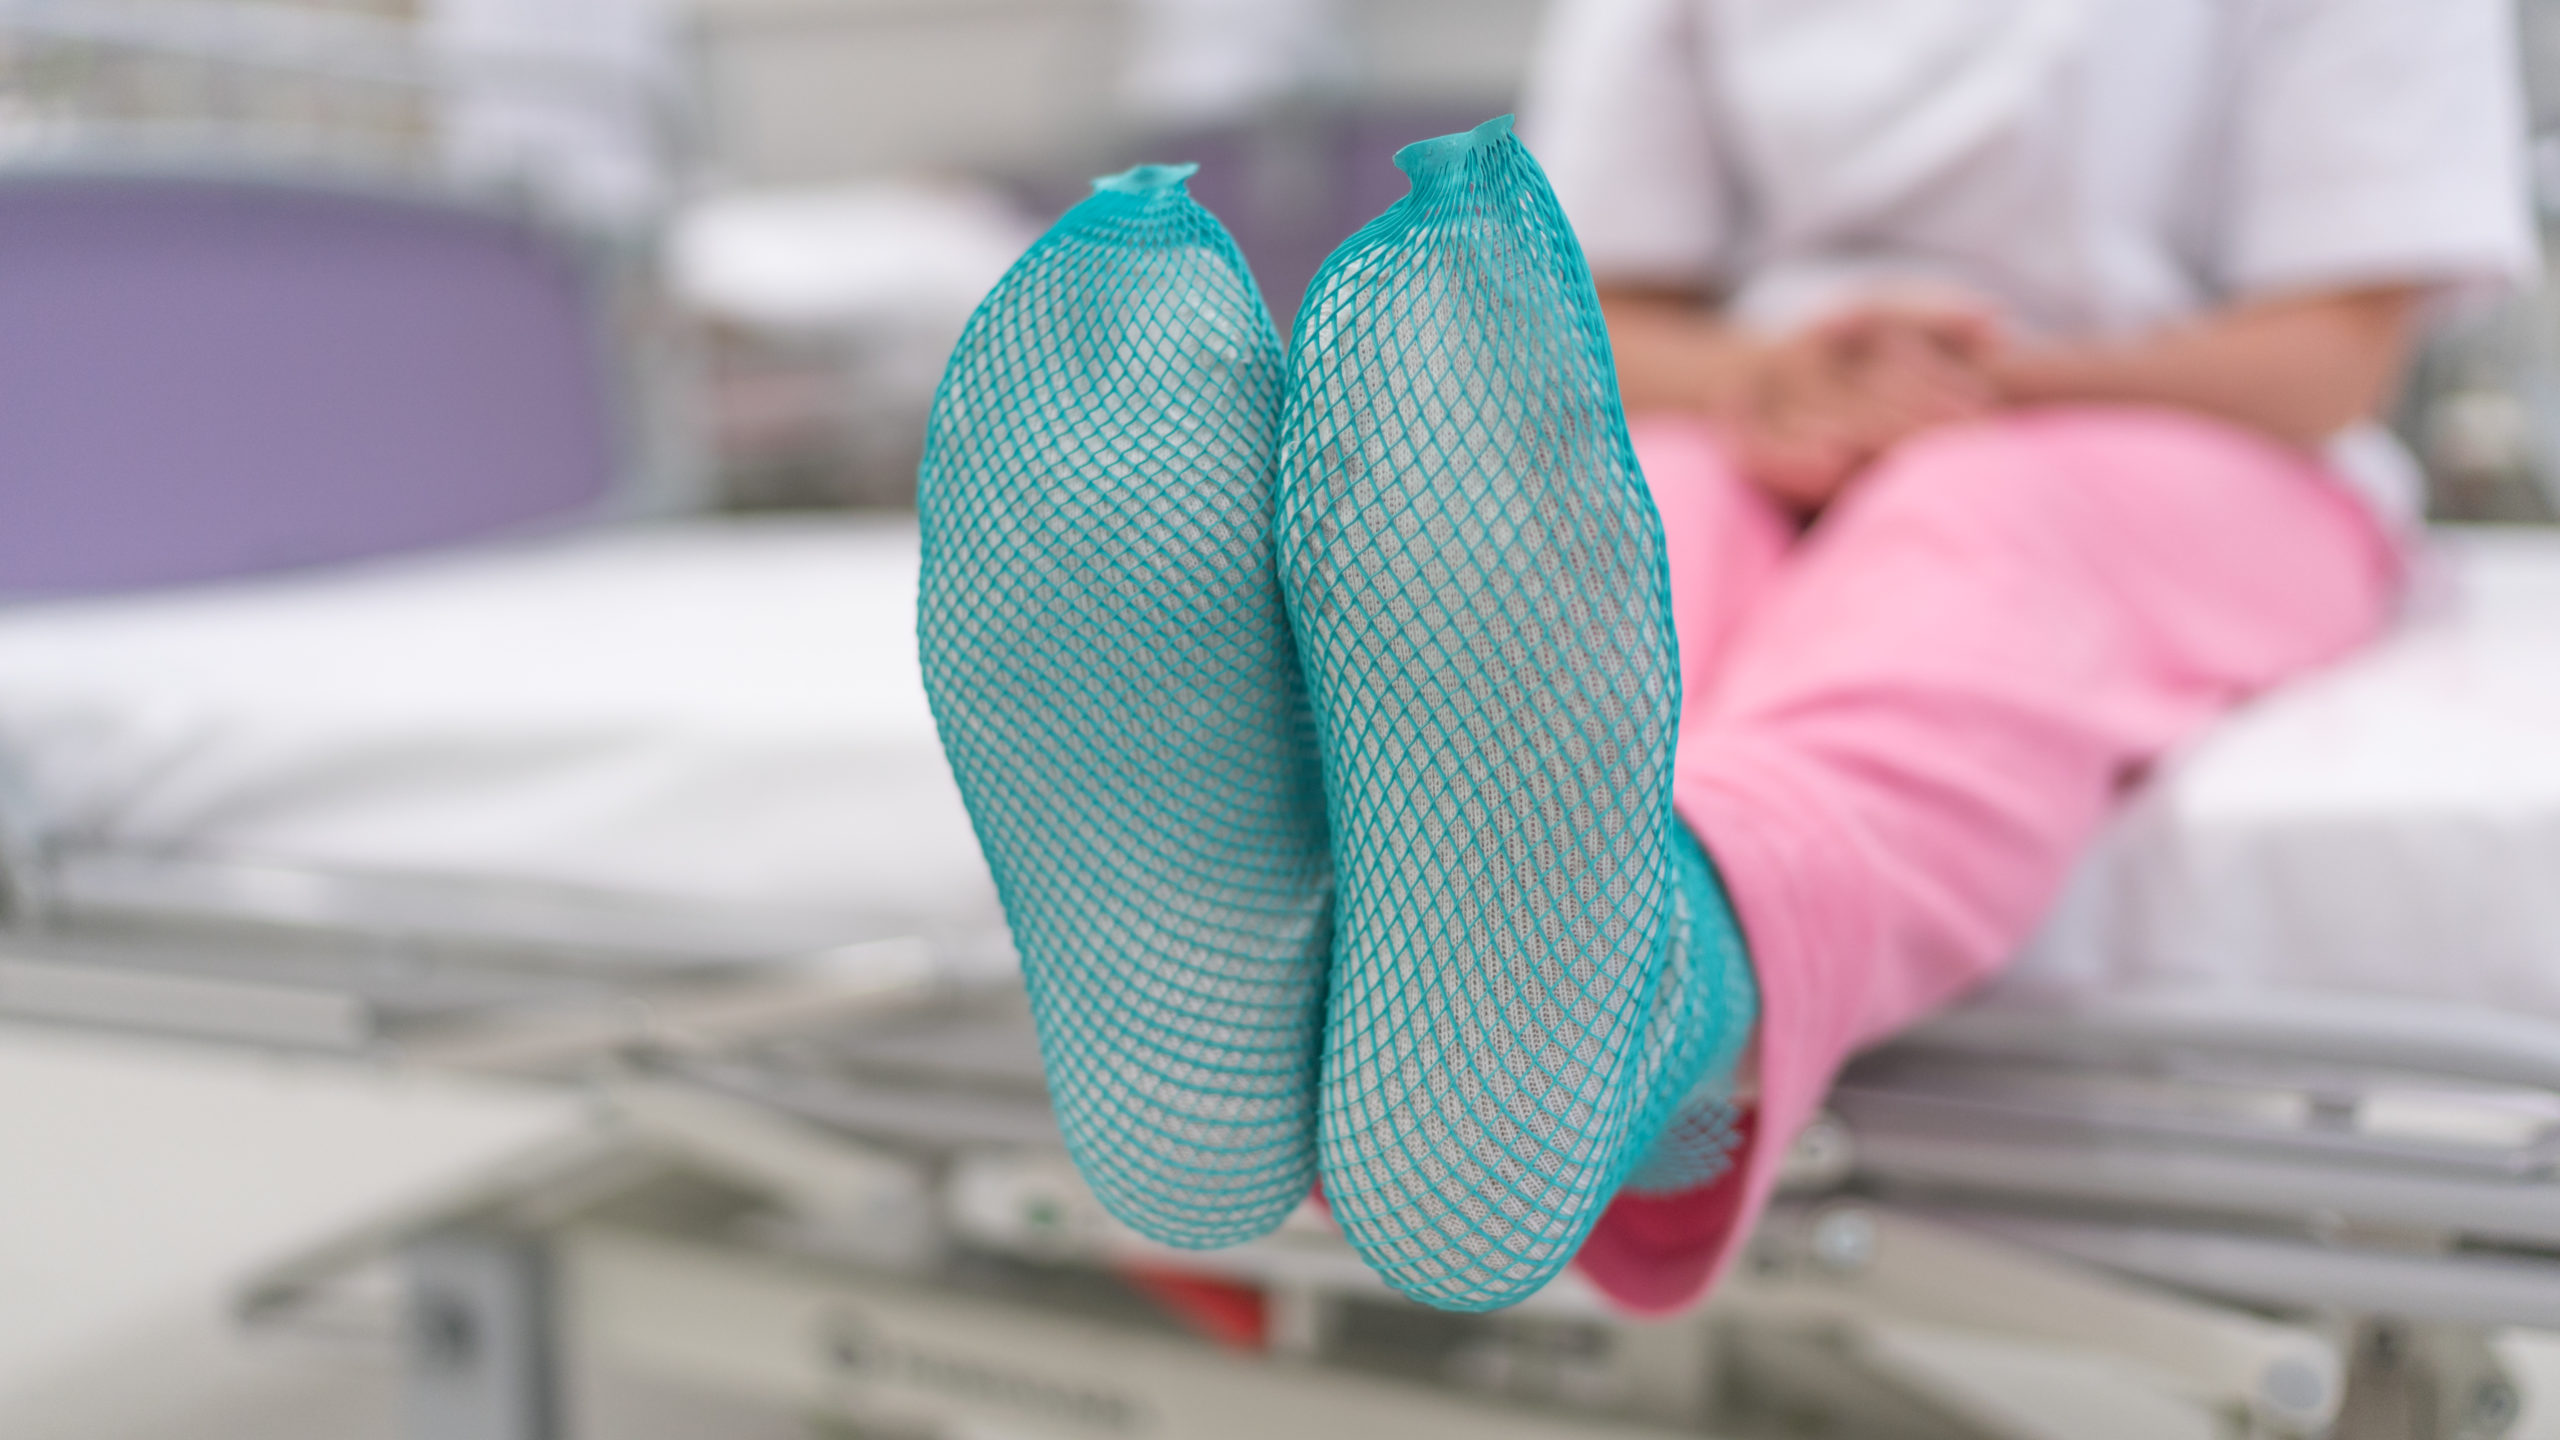 A person sits on a hospital bed wearing green mesh-like brake socks